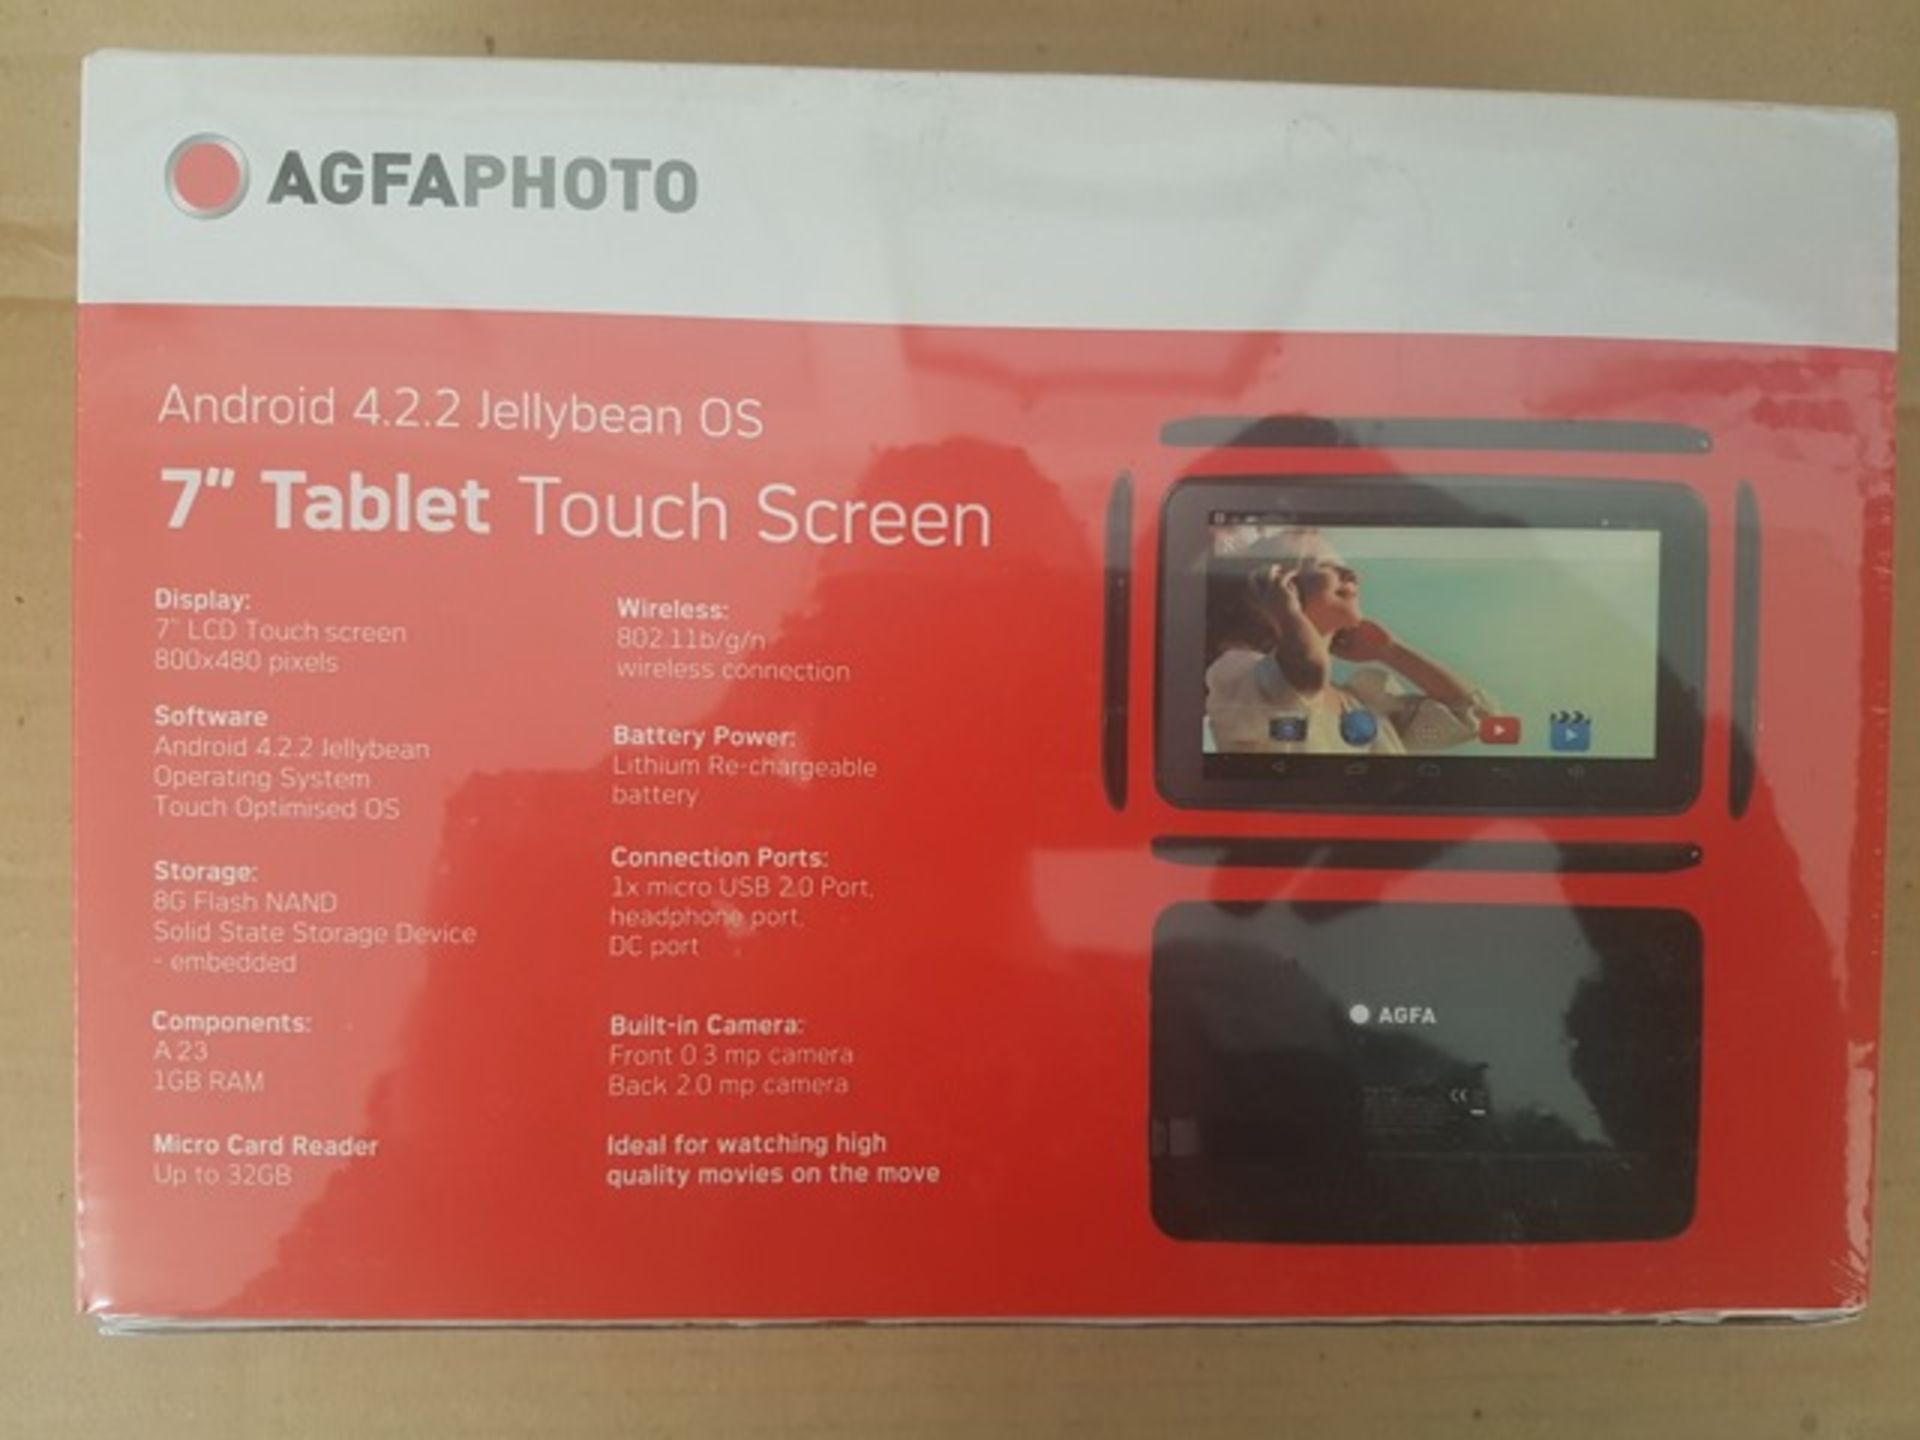 3 x Brand New Agfaphoto 7 Inch Tablet Touch Screen. Android 4.2.2 Jellybean OS. Dual Core, Built - Image 3 of 3